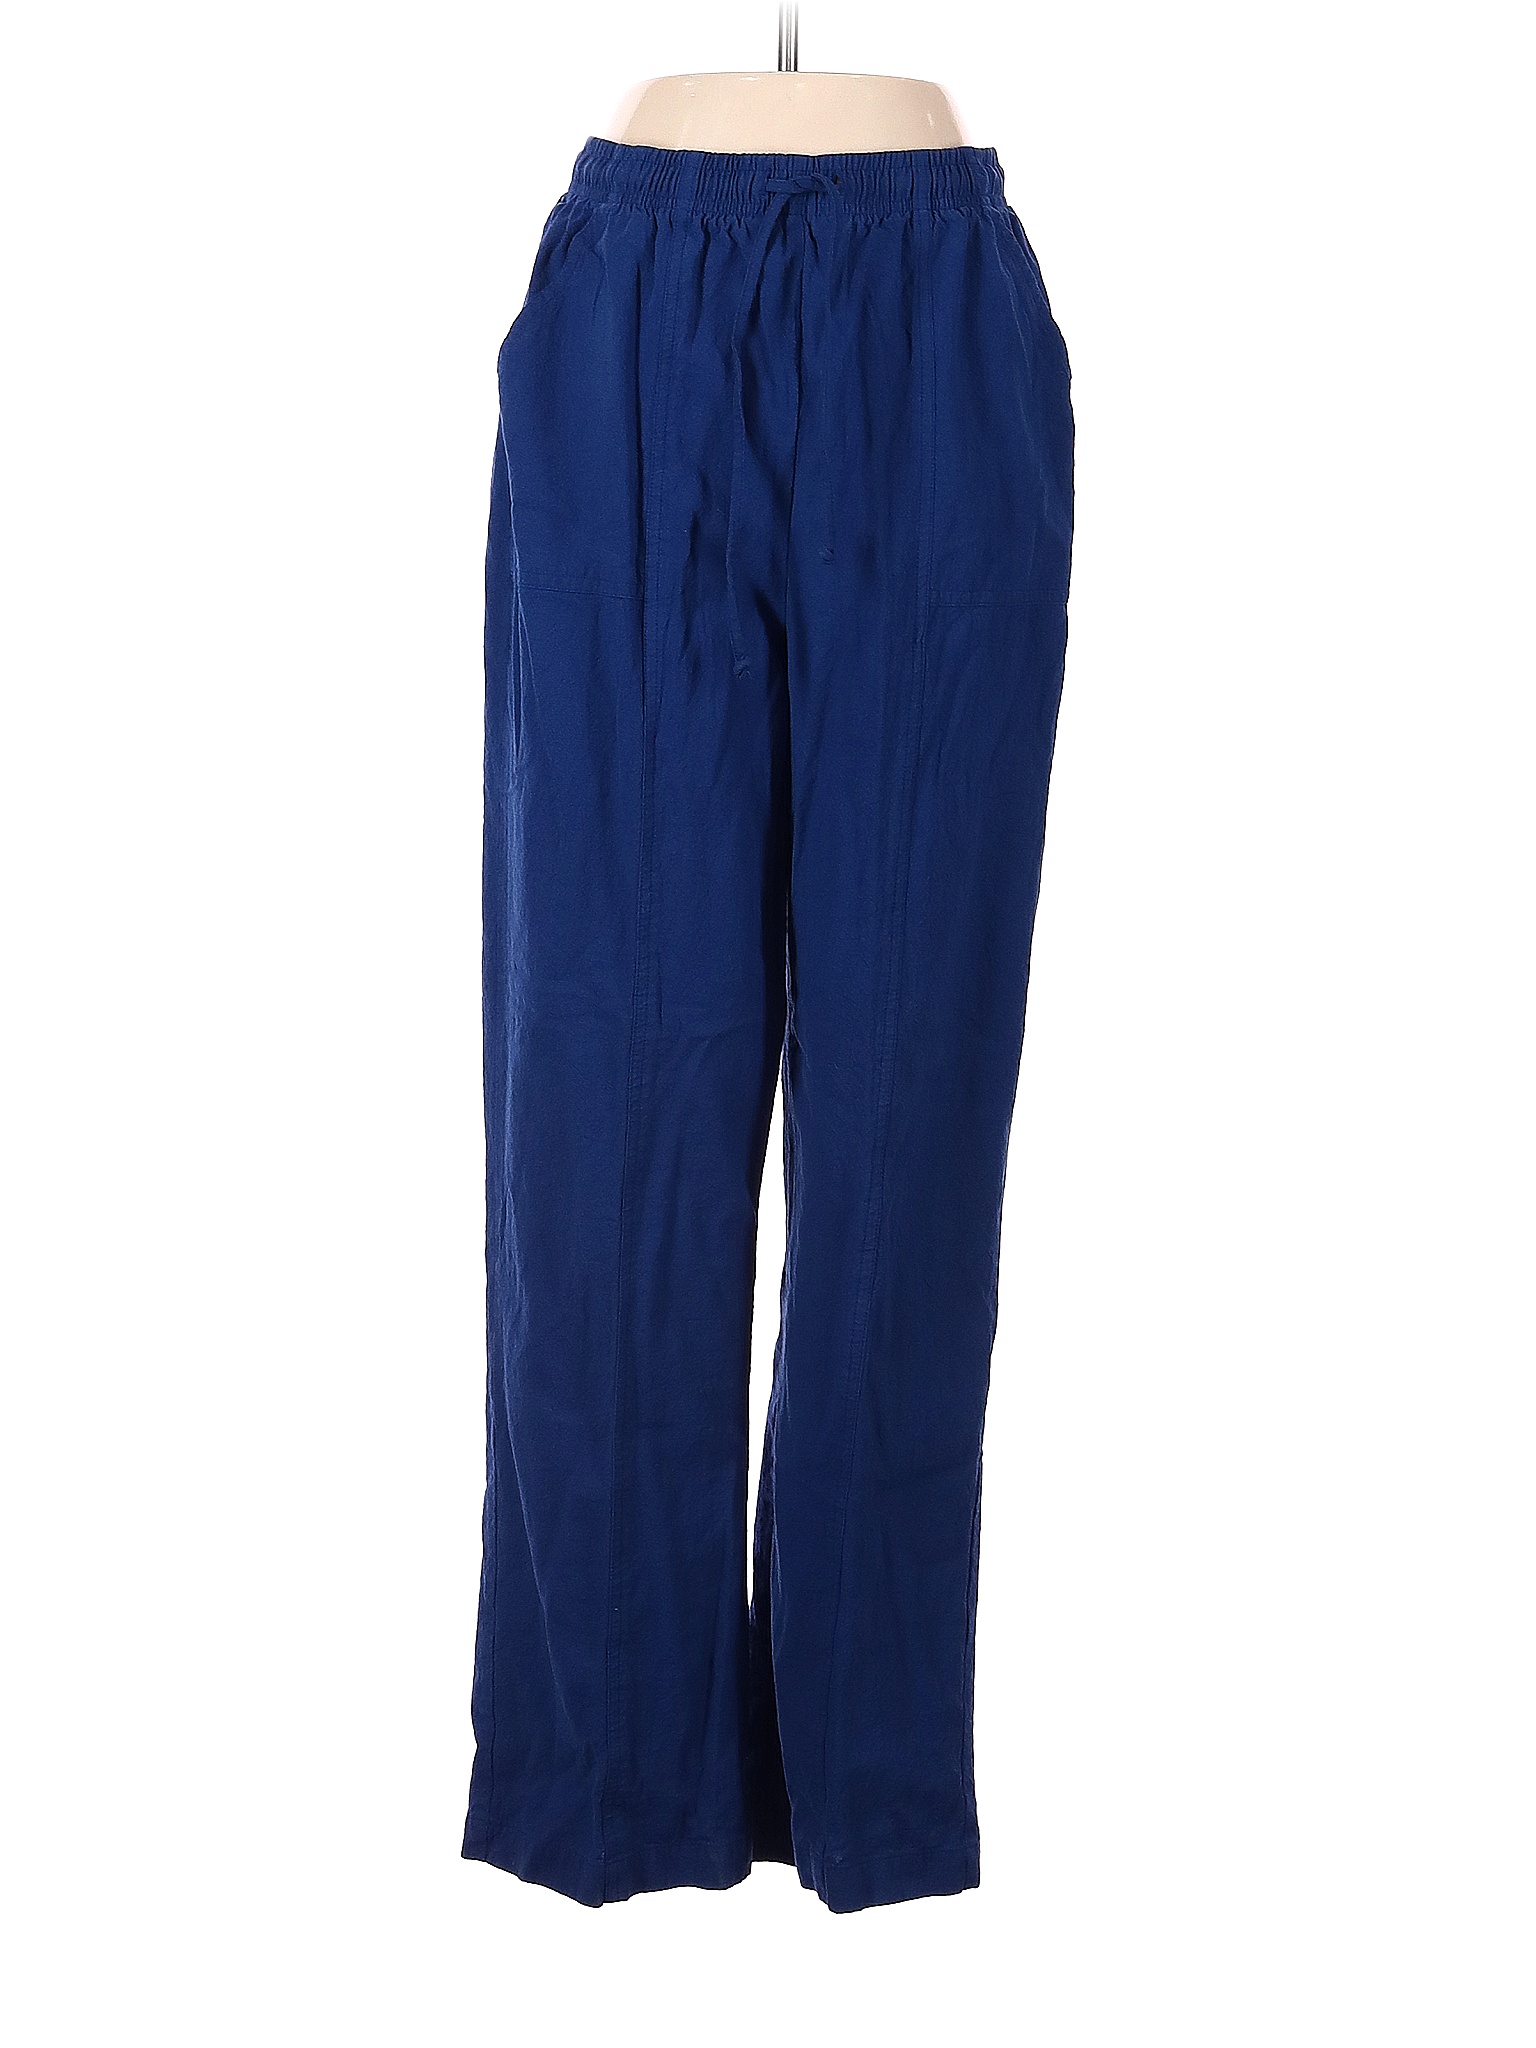 Blair 100% Polyester Solid Blue Casual Pants Size M - 70% off | thredUP